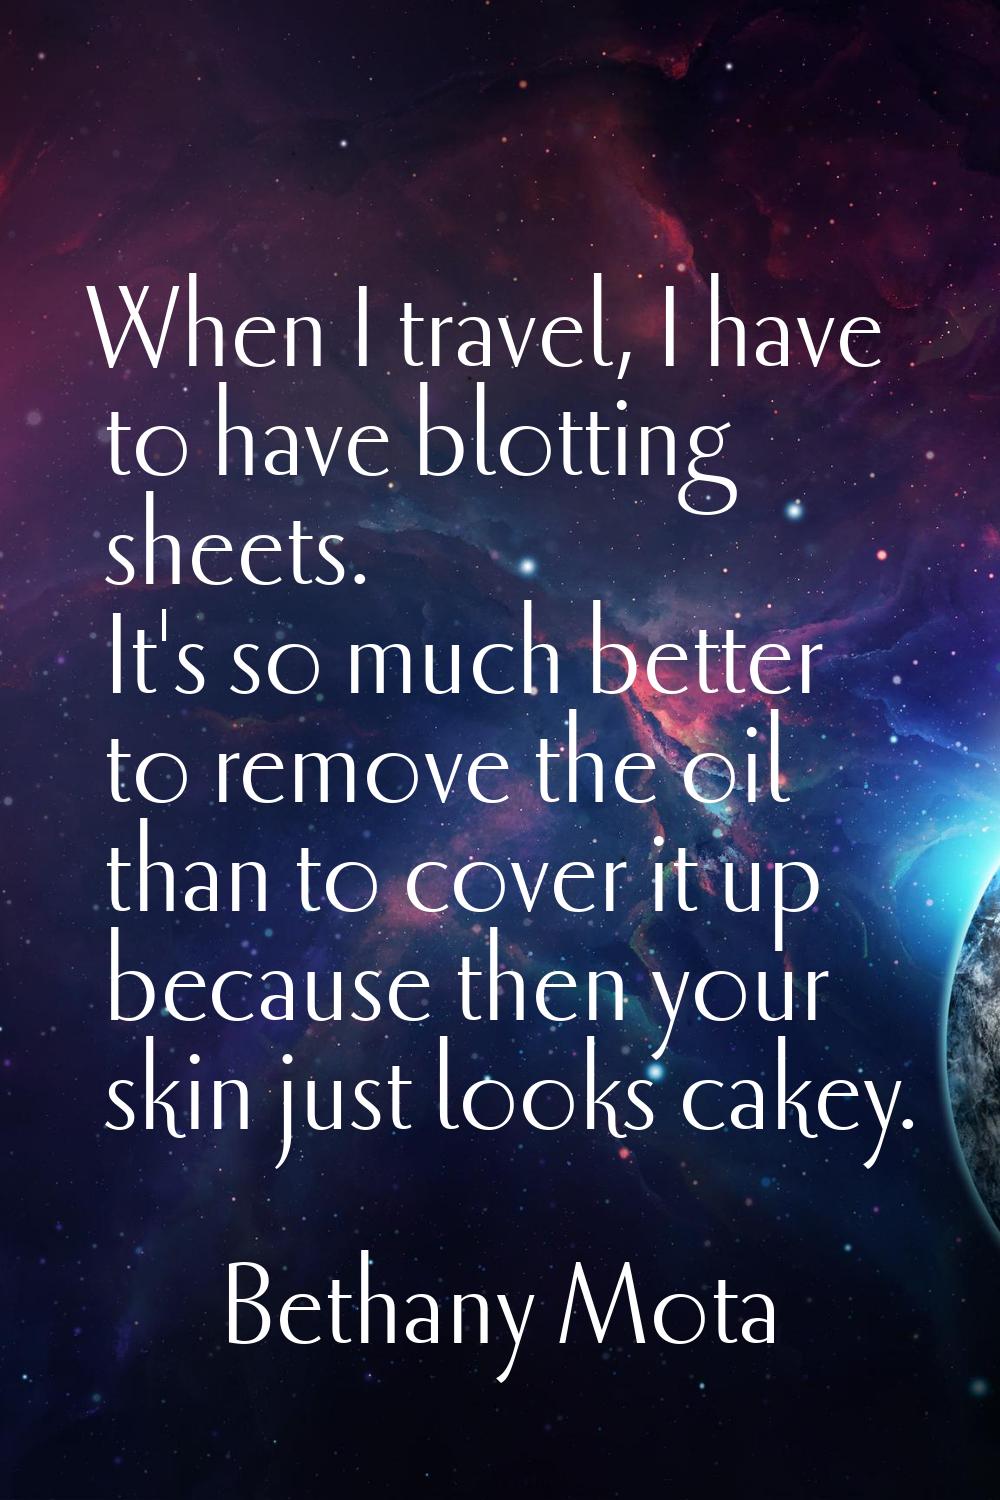 When I travel, I have to have blotting sheets. It's so much better to remove the oil than to cover 